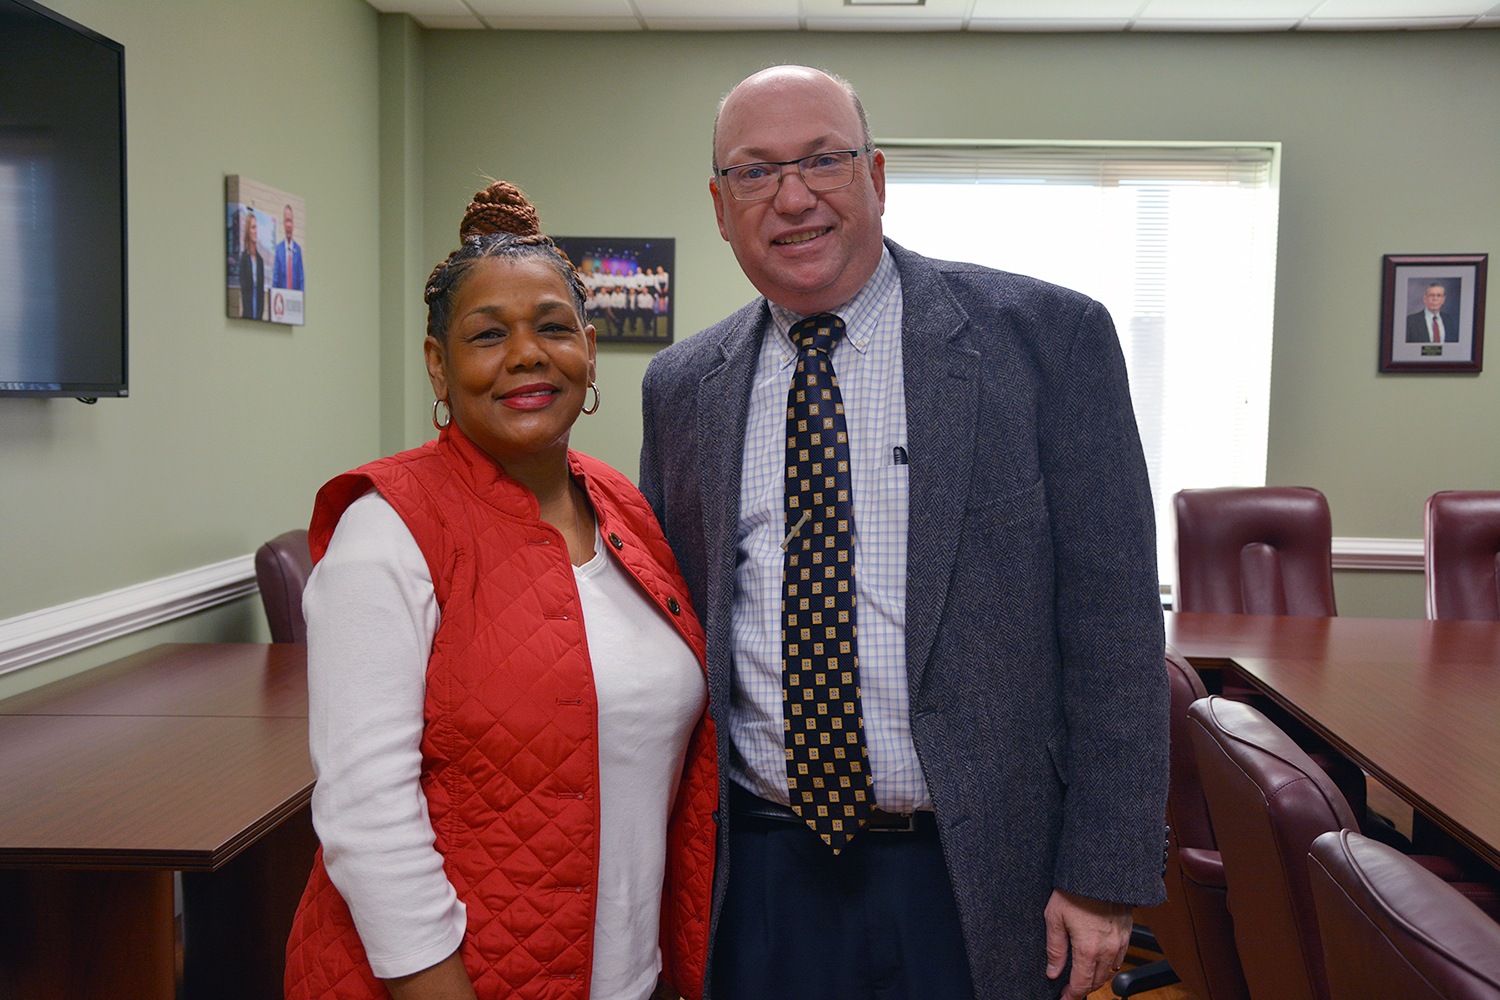 Evonne Moore shakes hands with Dr. Dale McInnis